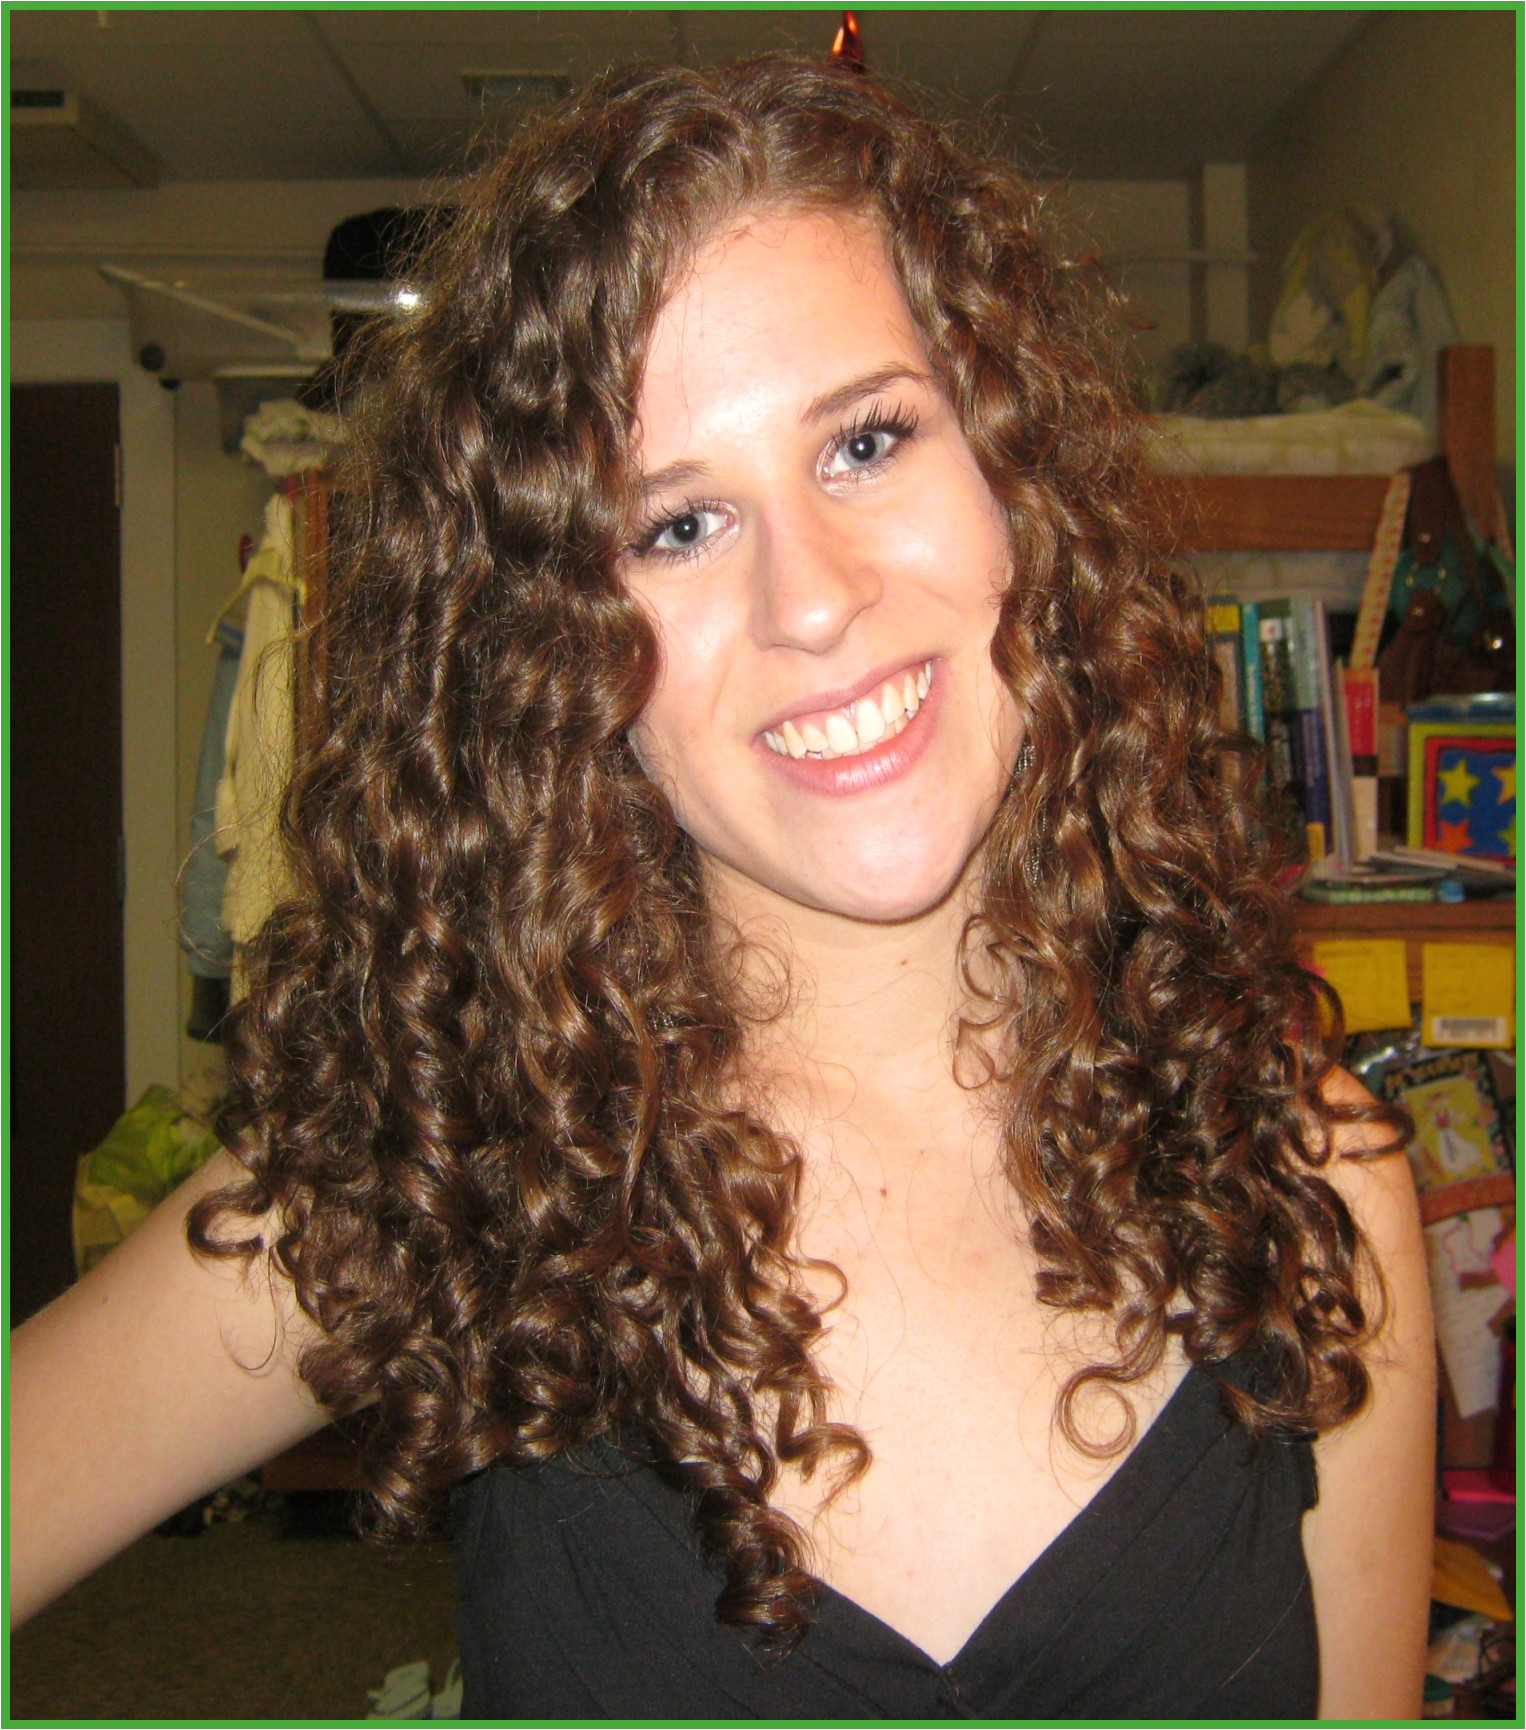 Cute Girls Hairstyles Names Exciting Very Curly Hairstyles Fresh Curly Hair 0d Archives Hair